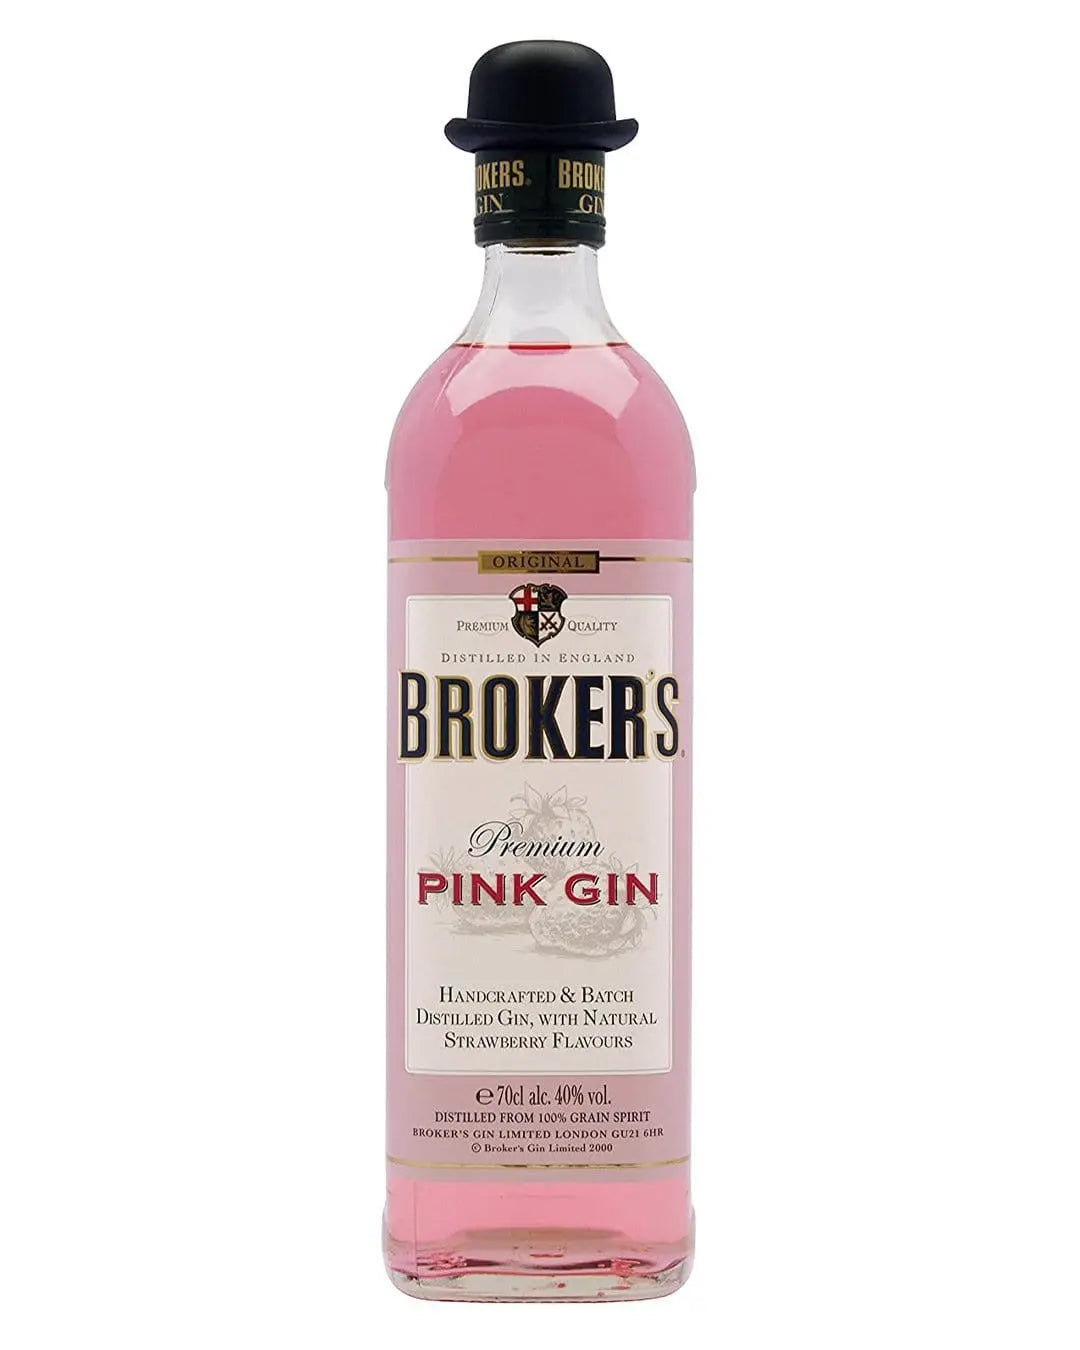 Brokers Pink Gin, 70 cl Gin 5060017740158 